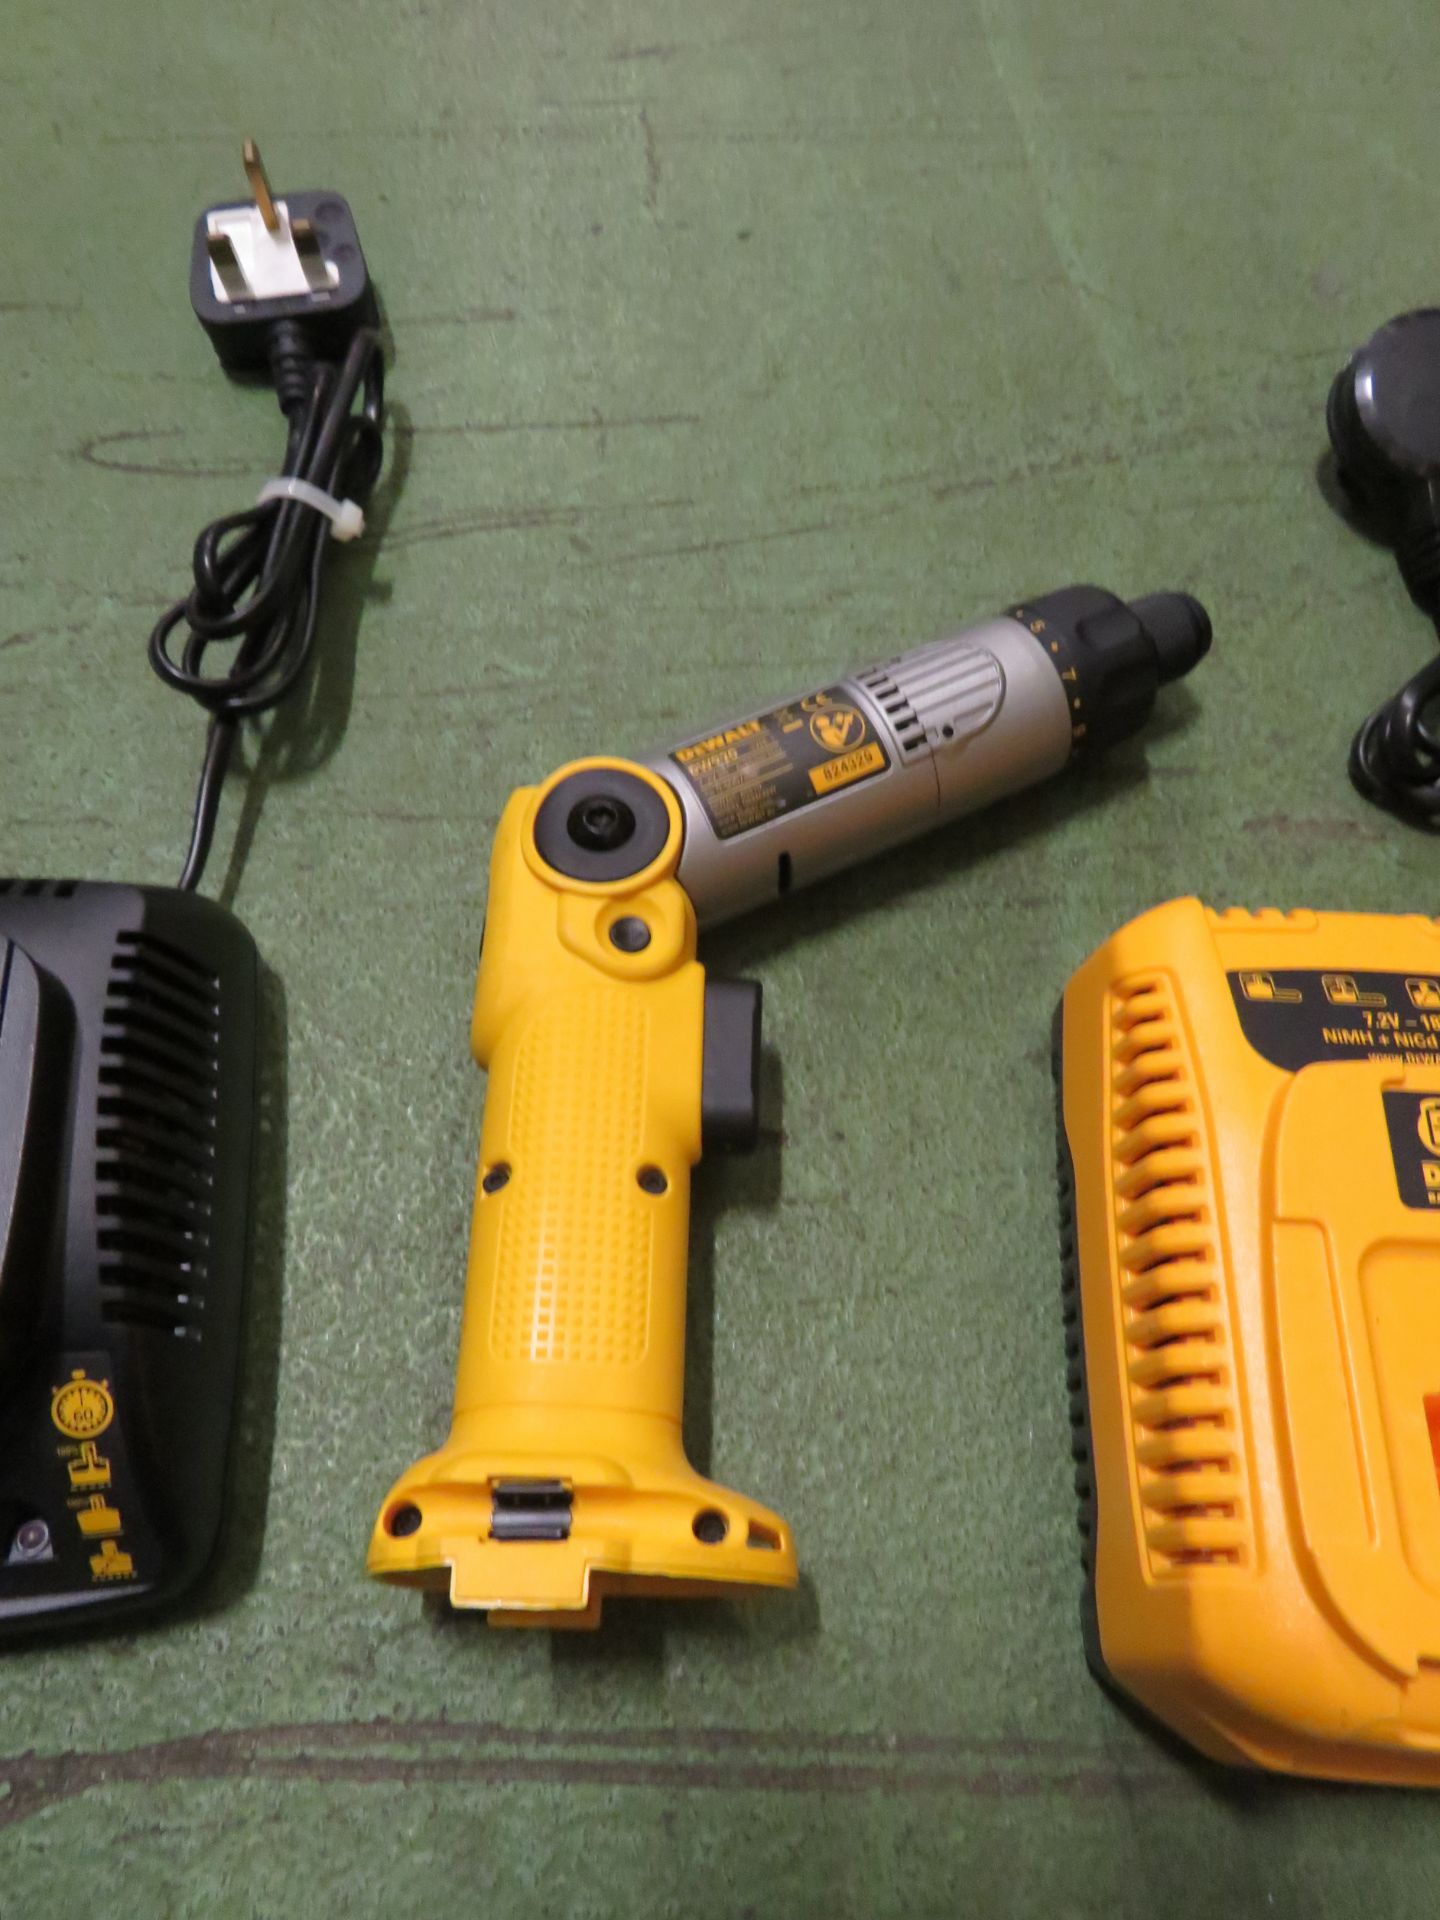 DeWalt DW920 Cordless Multiangle Drill & Charger - Image 2 of 2